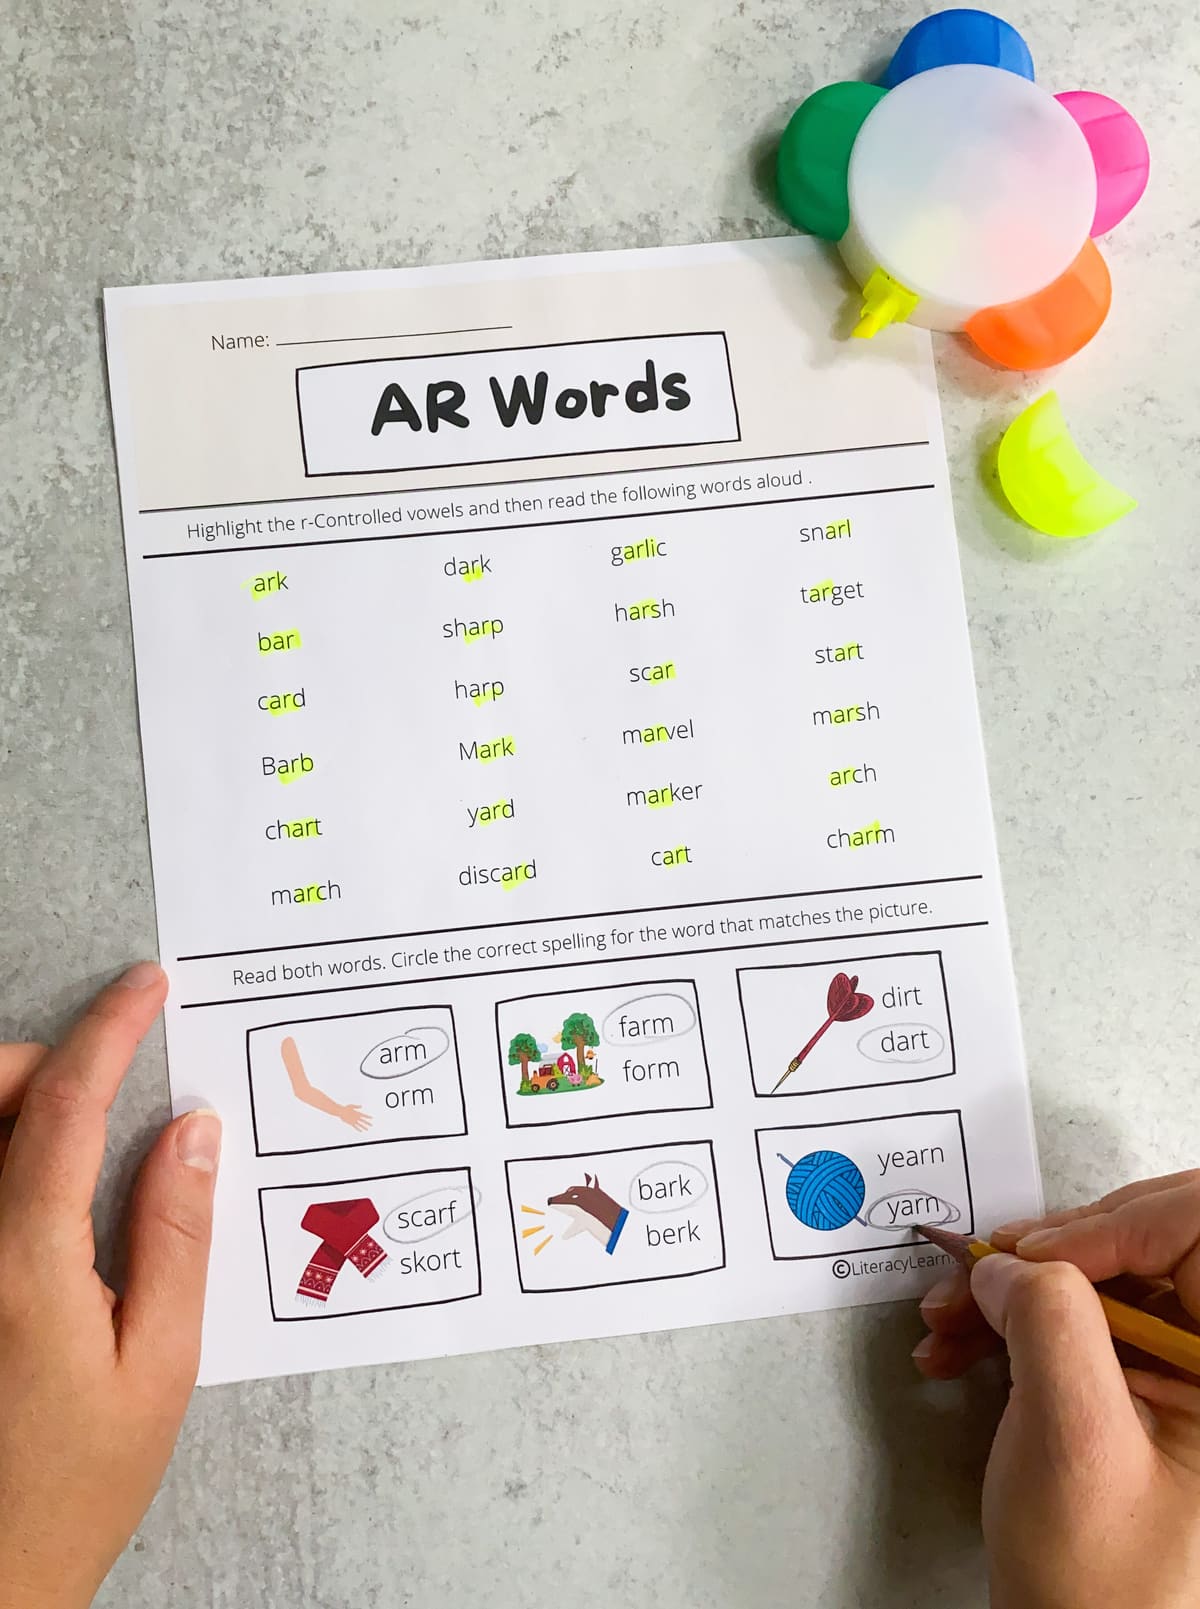 Hands holding a pencil completing the printed AR words worksheet.